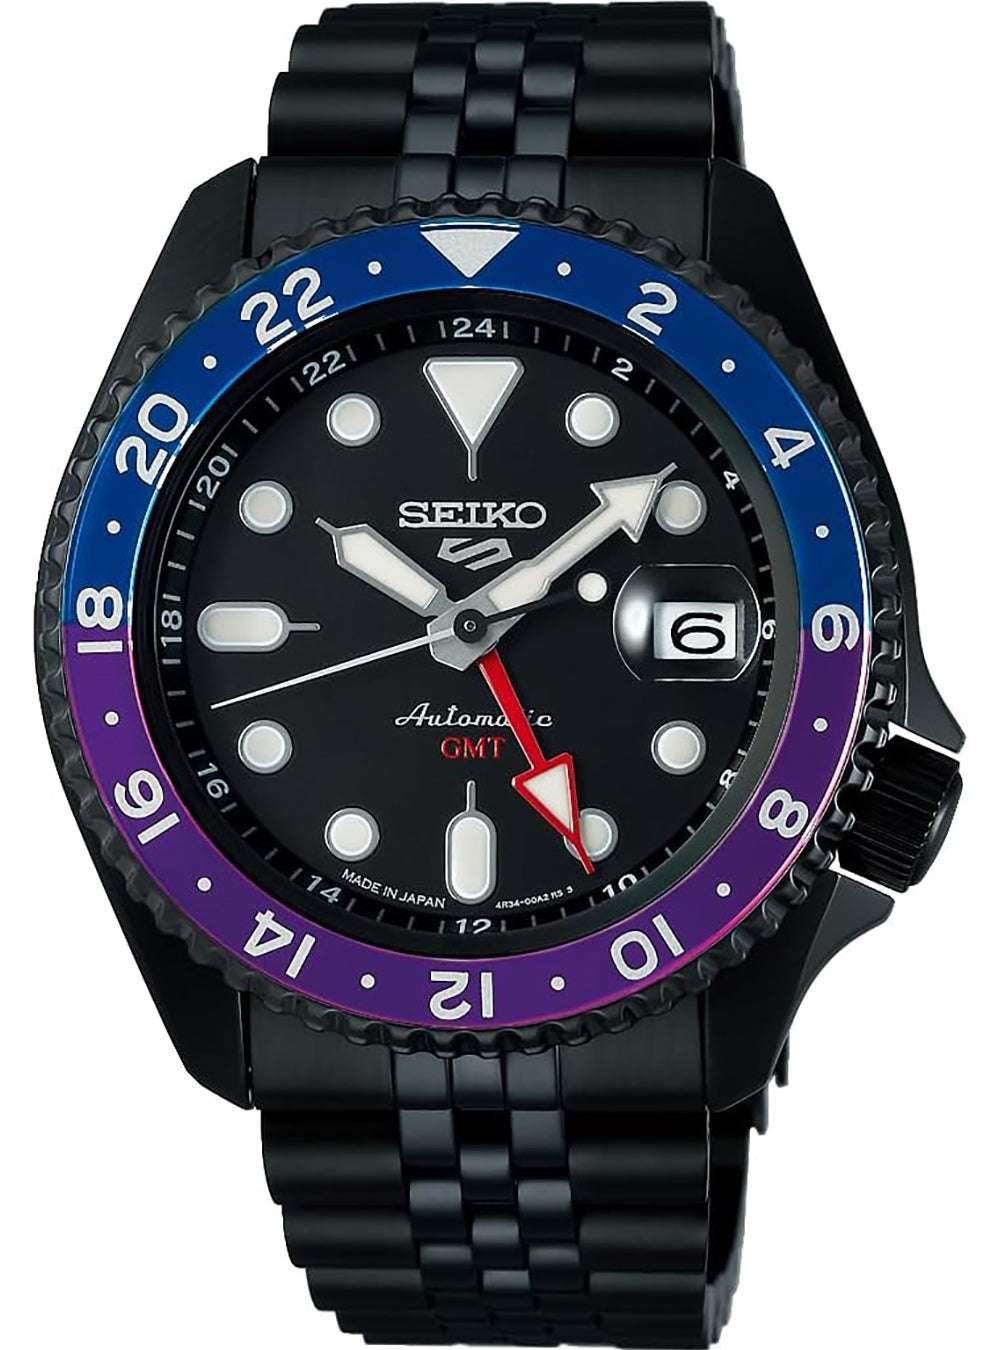 SEIKO 5 SPORTS YUTO HORIGOME LIMITED EDITION SBSC015 MADE IN JAPAN JDM